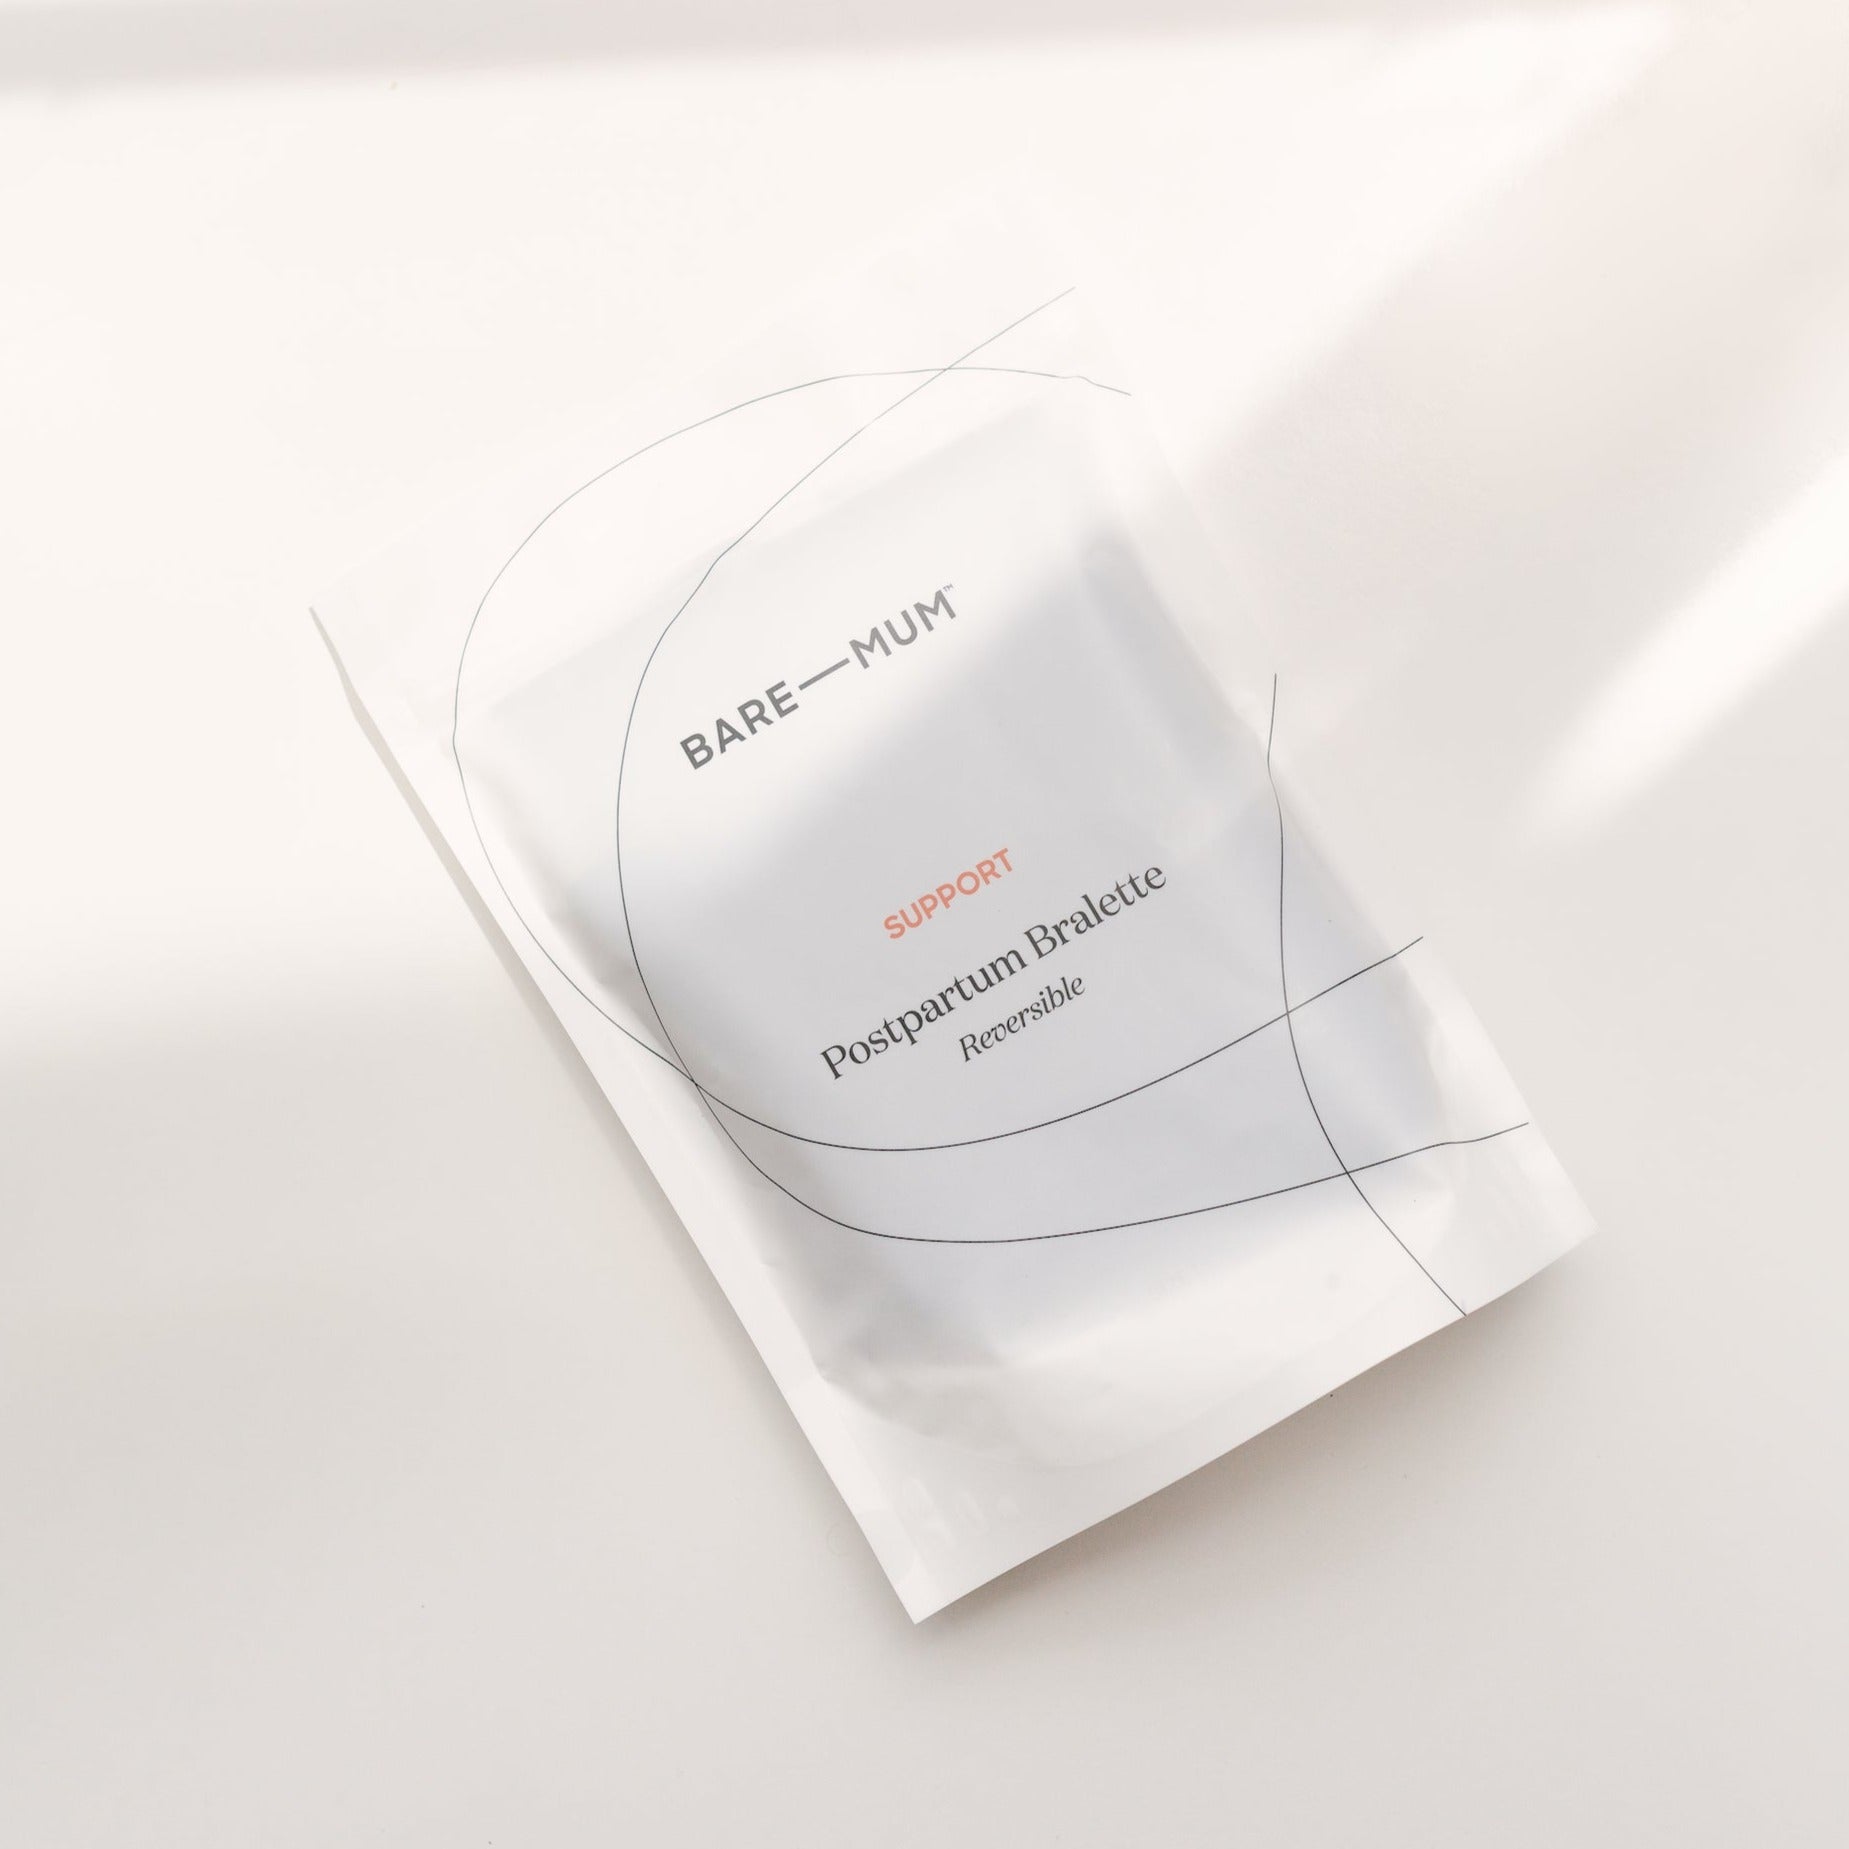 A postpartum Bare Mum Breast Care Kit packet sitting on top of a white surface.